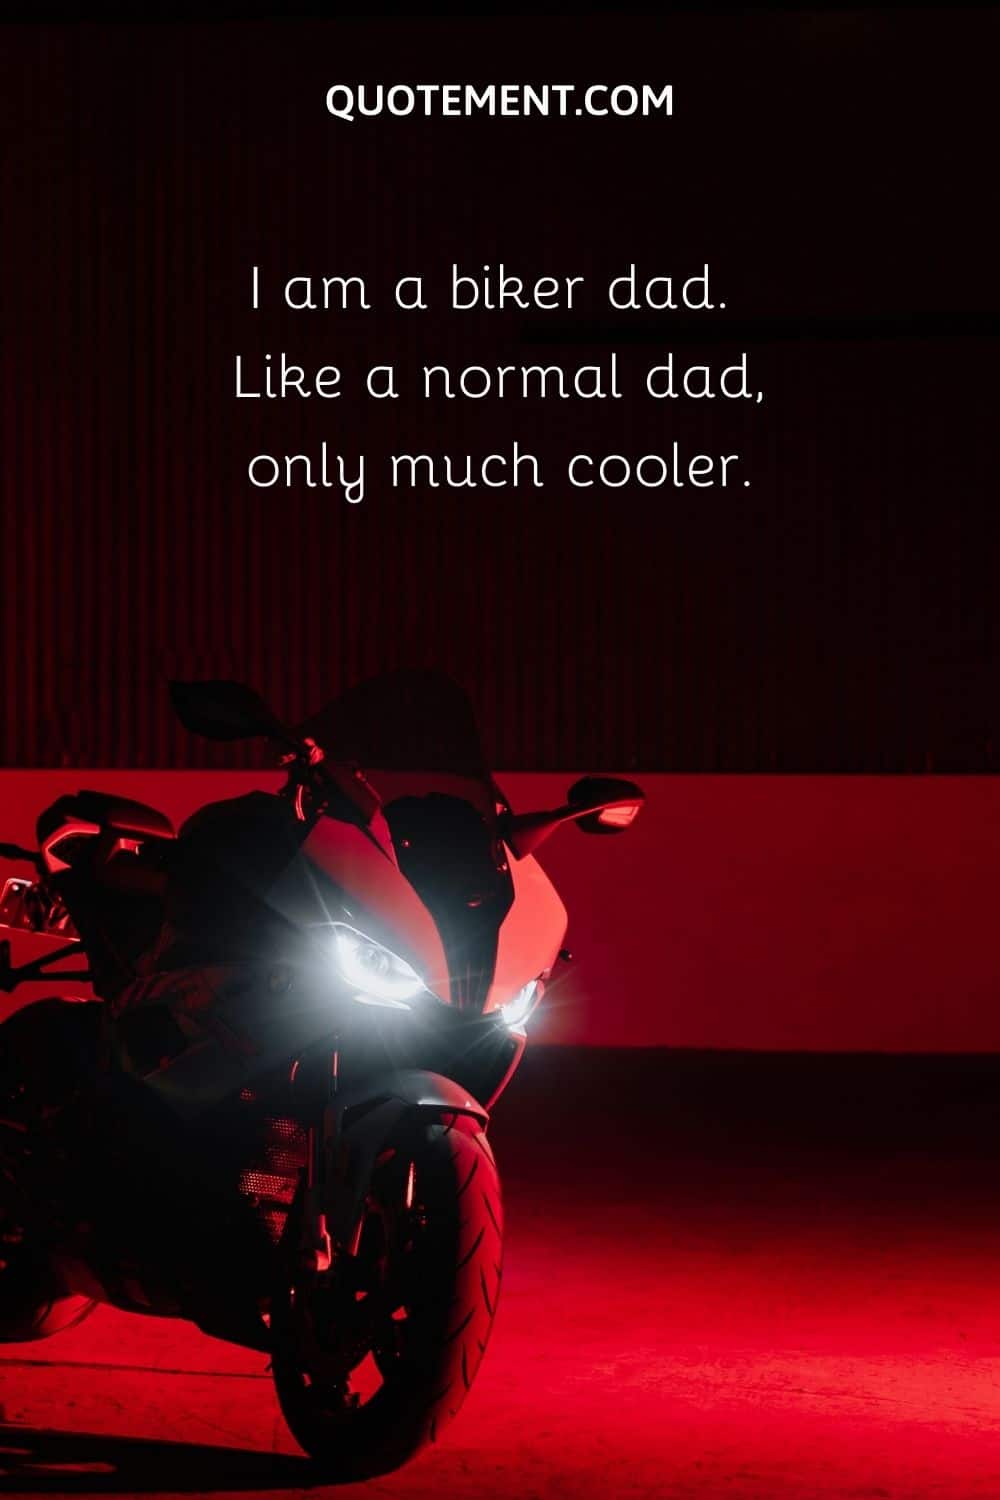 I am a biker dad. Like a normal dad, only much cooler.